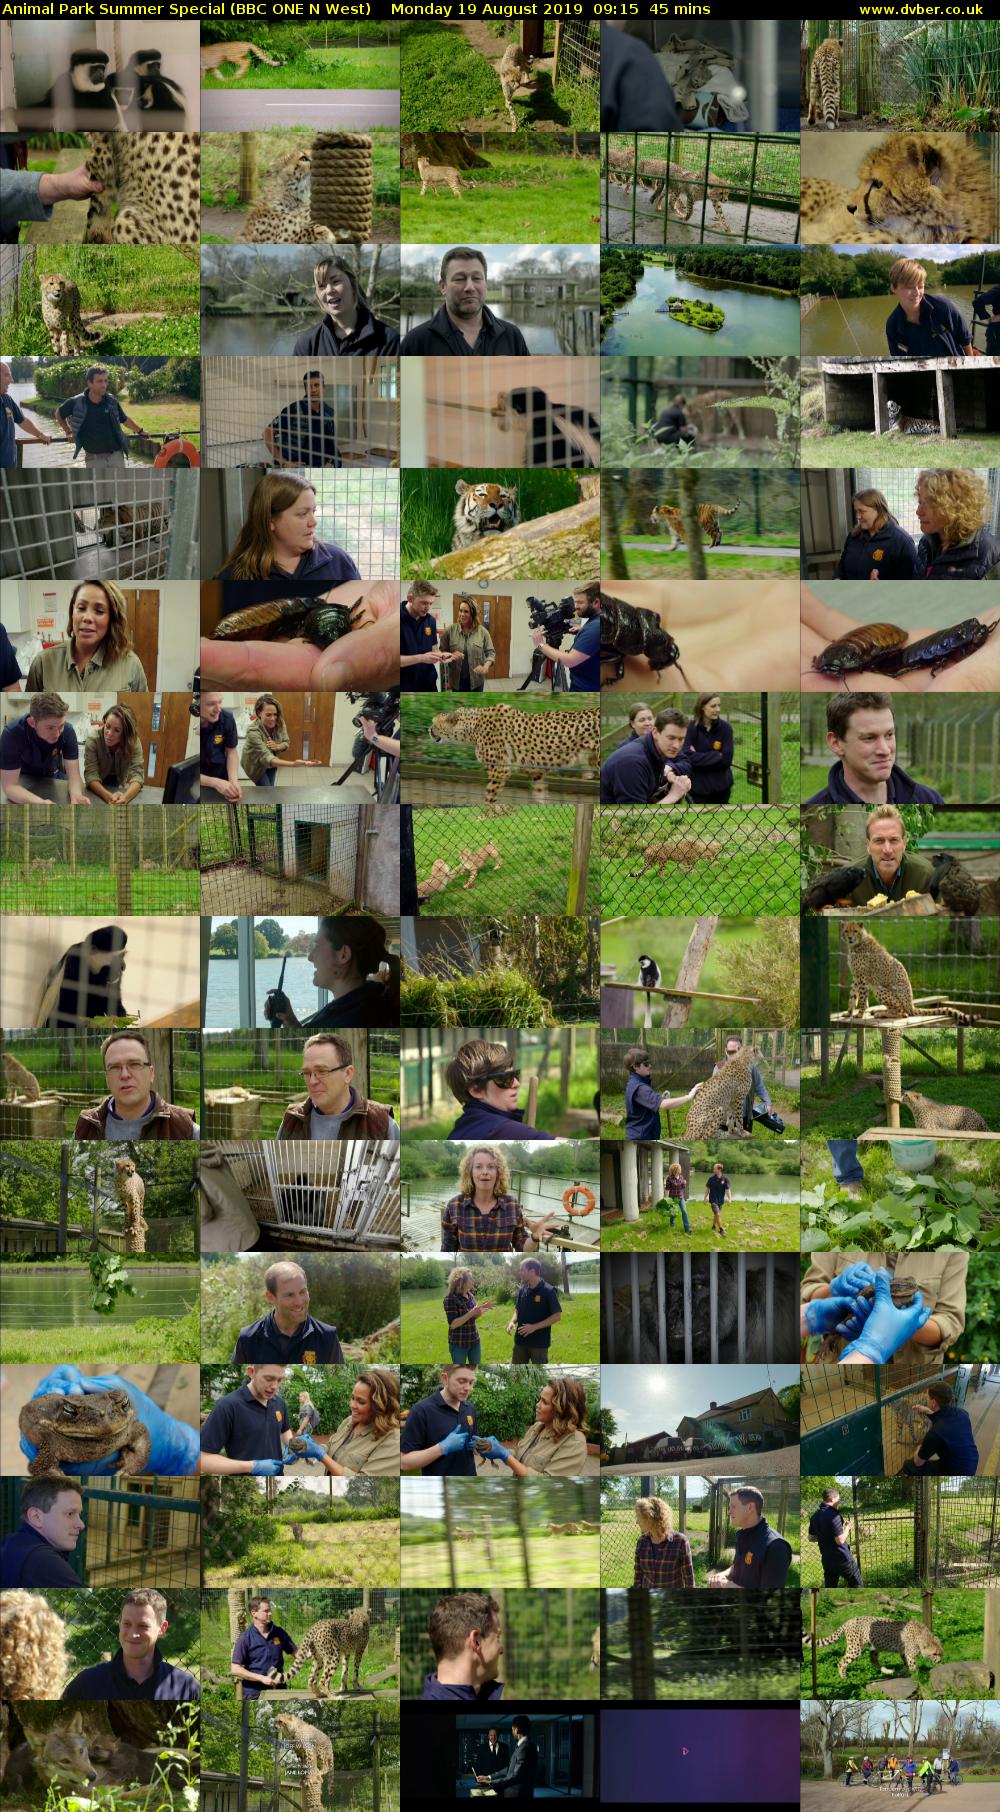 Animal Park Summer Special (BBC ONE N West) Monday 19 August 2019 09:15 - 10:00